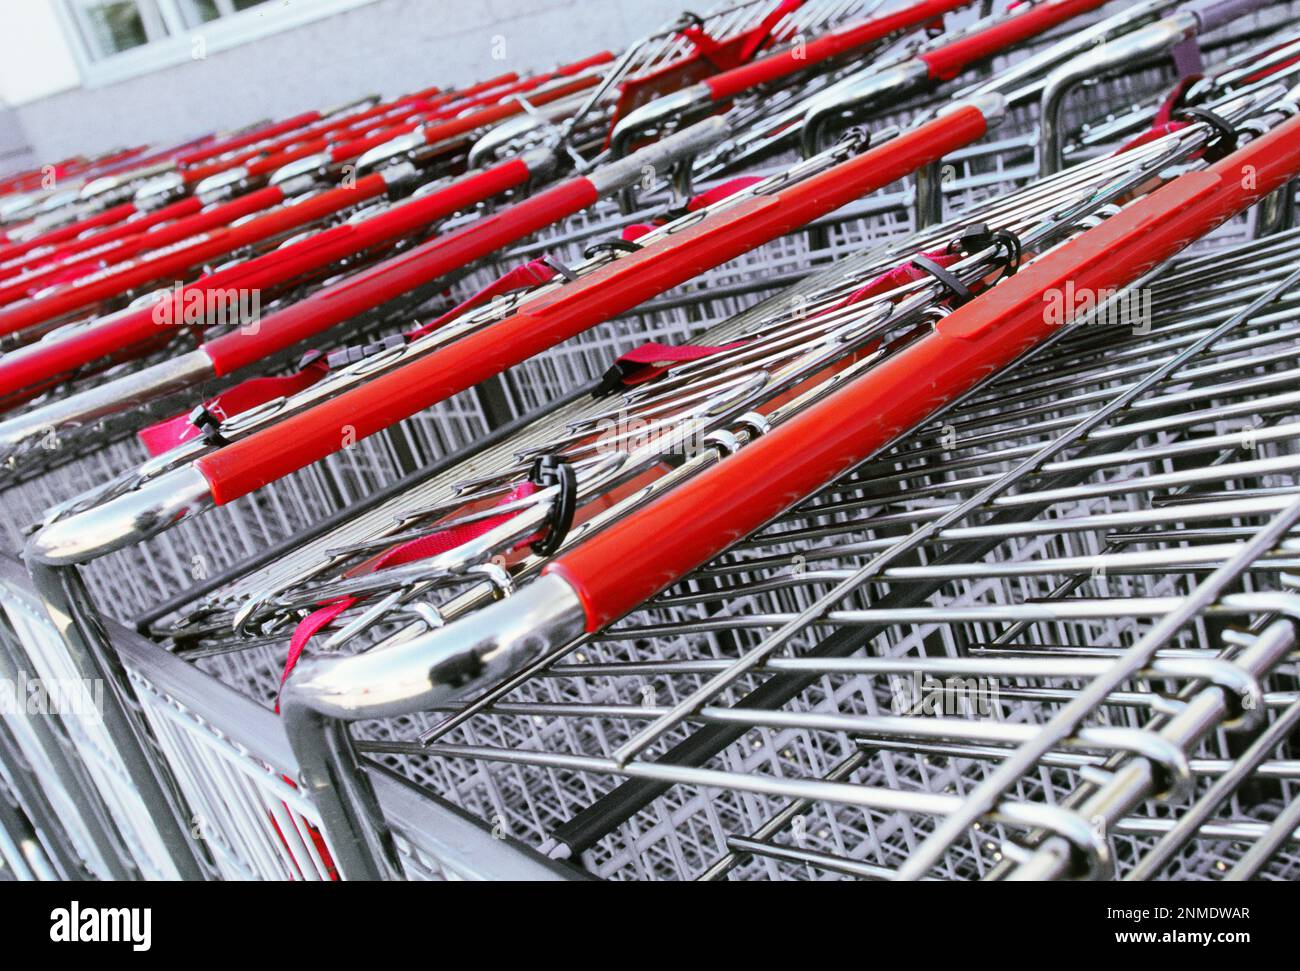 Supermarket shopping carts stacked. Empty grocery shopping trolleys lined up Stock Photo